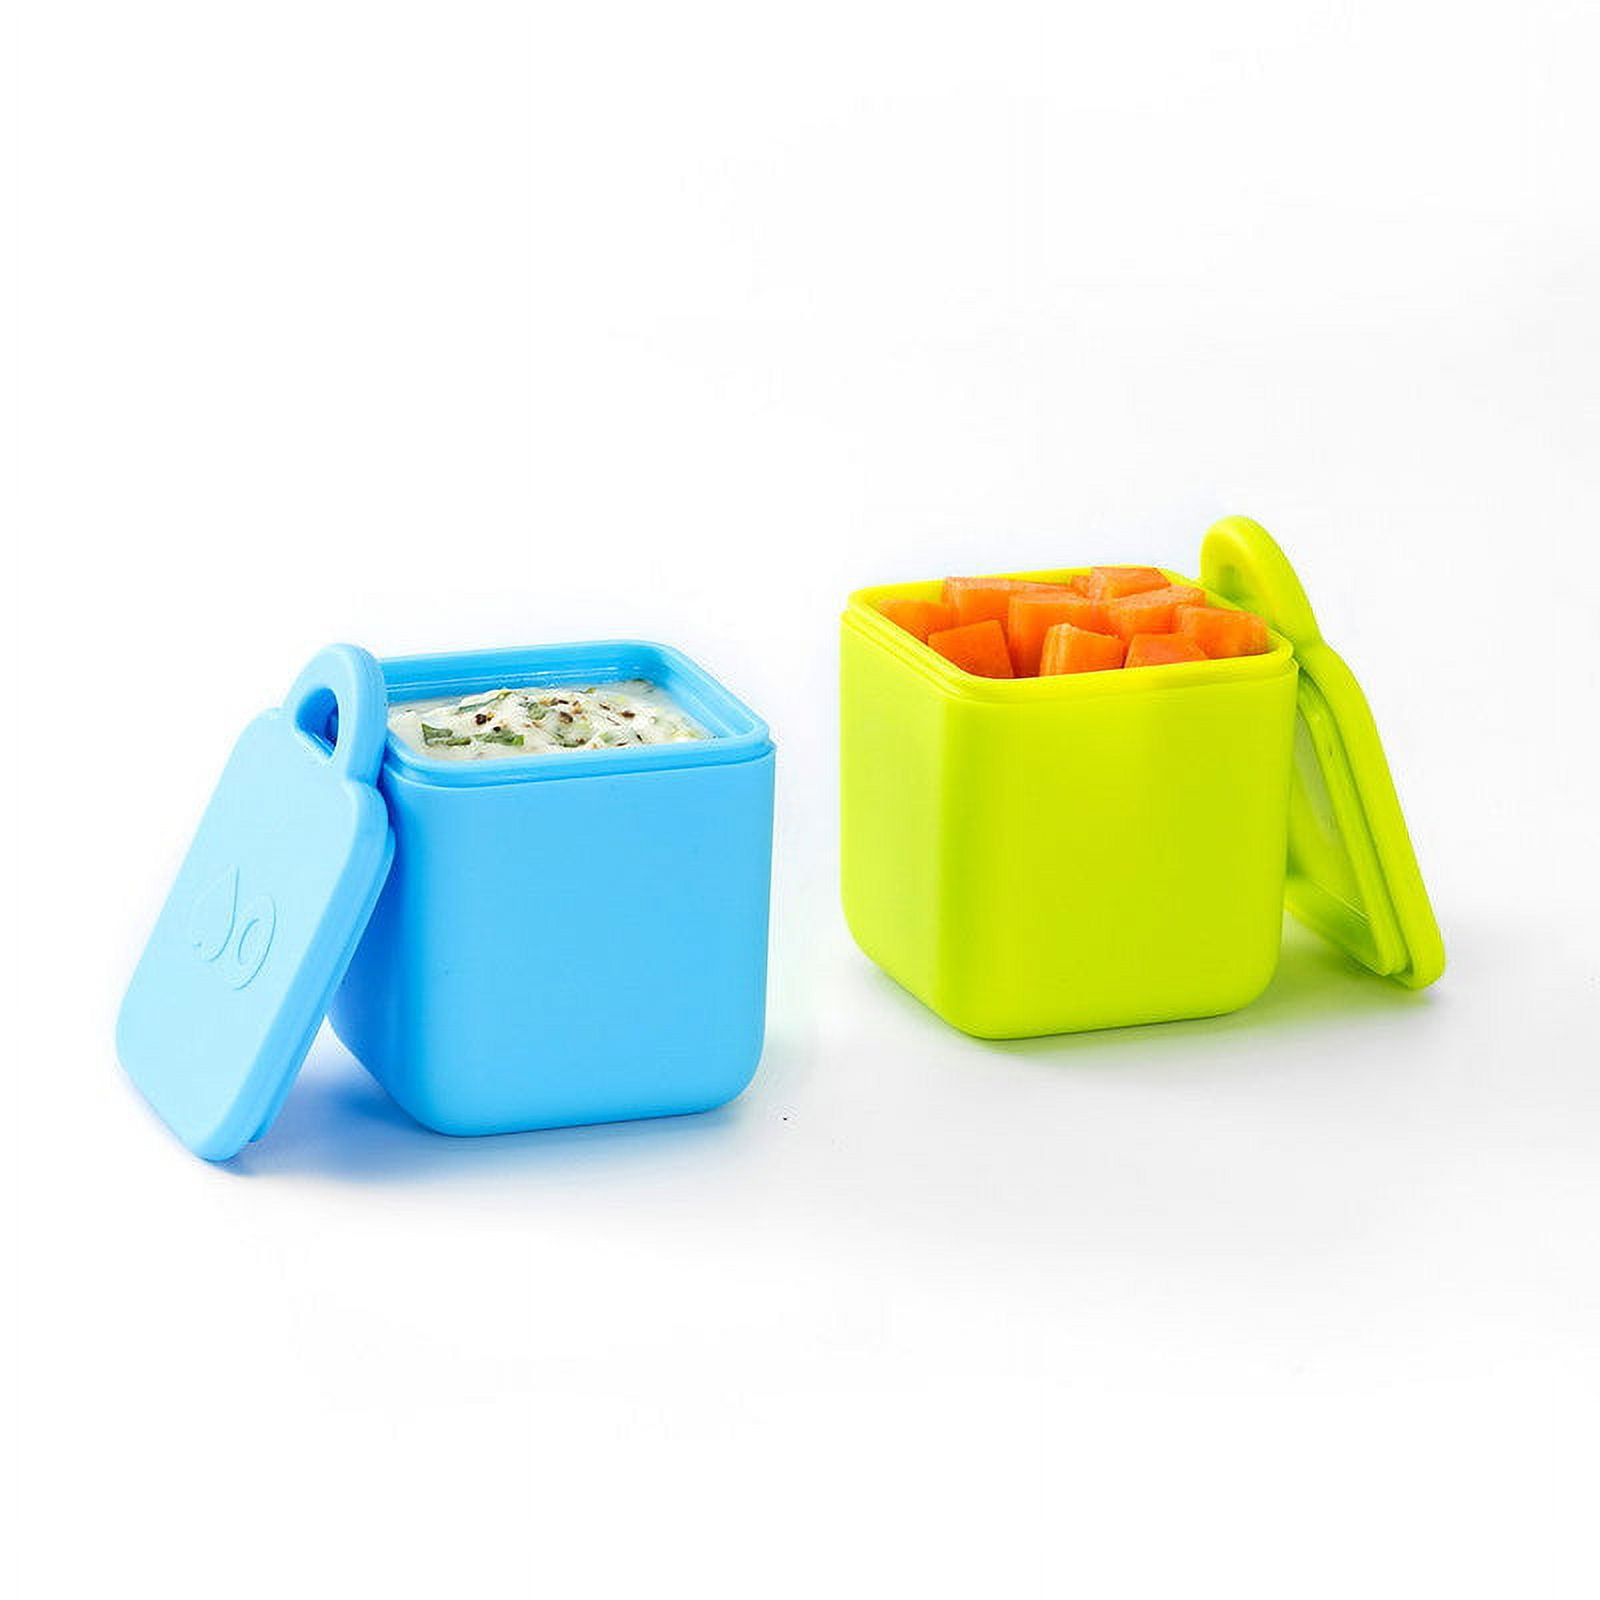  Morlike Dips Containers To Go, Silicone Salad Dressing